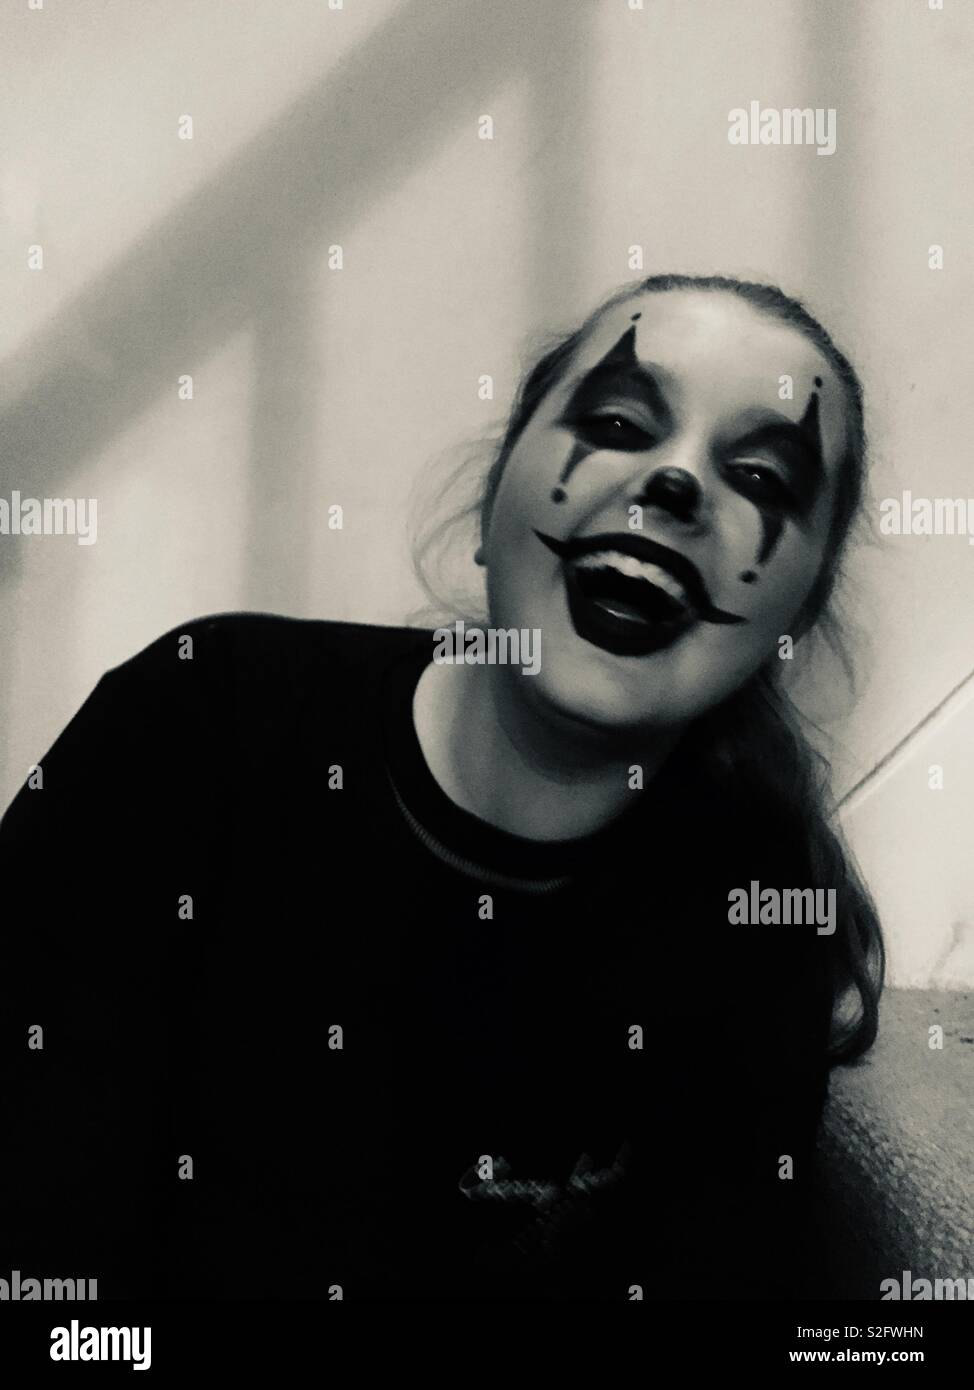 Laughing girl clown Banque D'Images